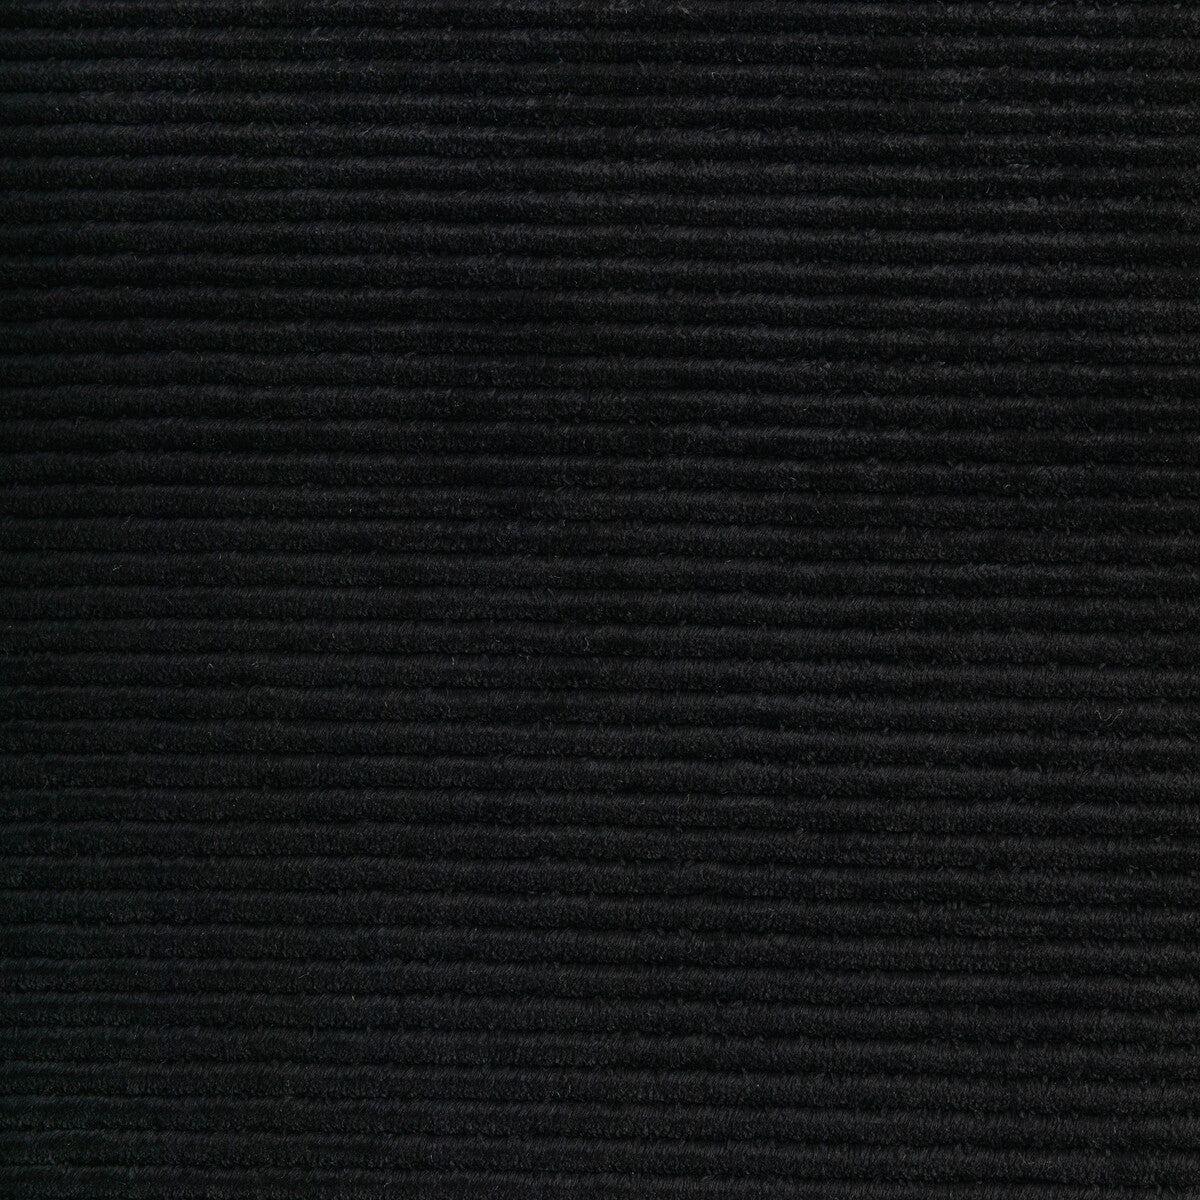 Justly Famous fabric in noir color - pattern 33950.8.0 - by Kravet Couture in the Modern Luxe III collection